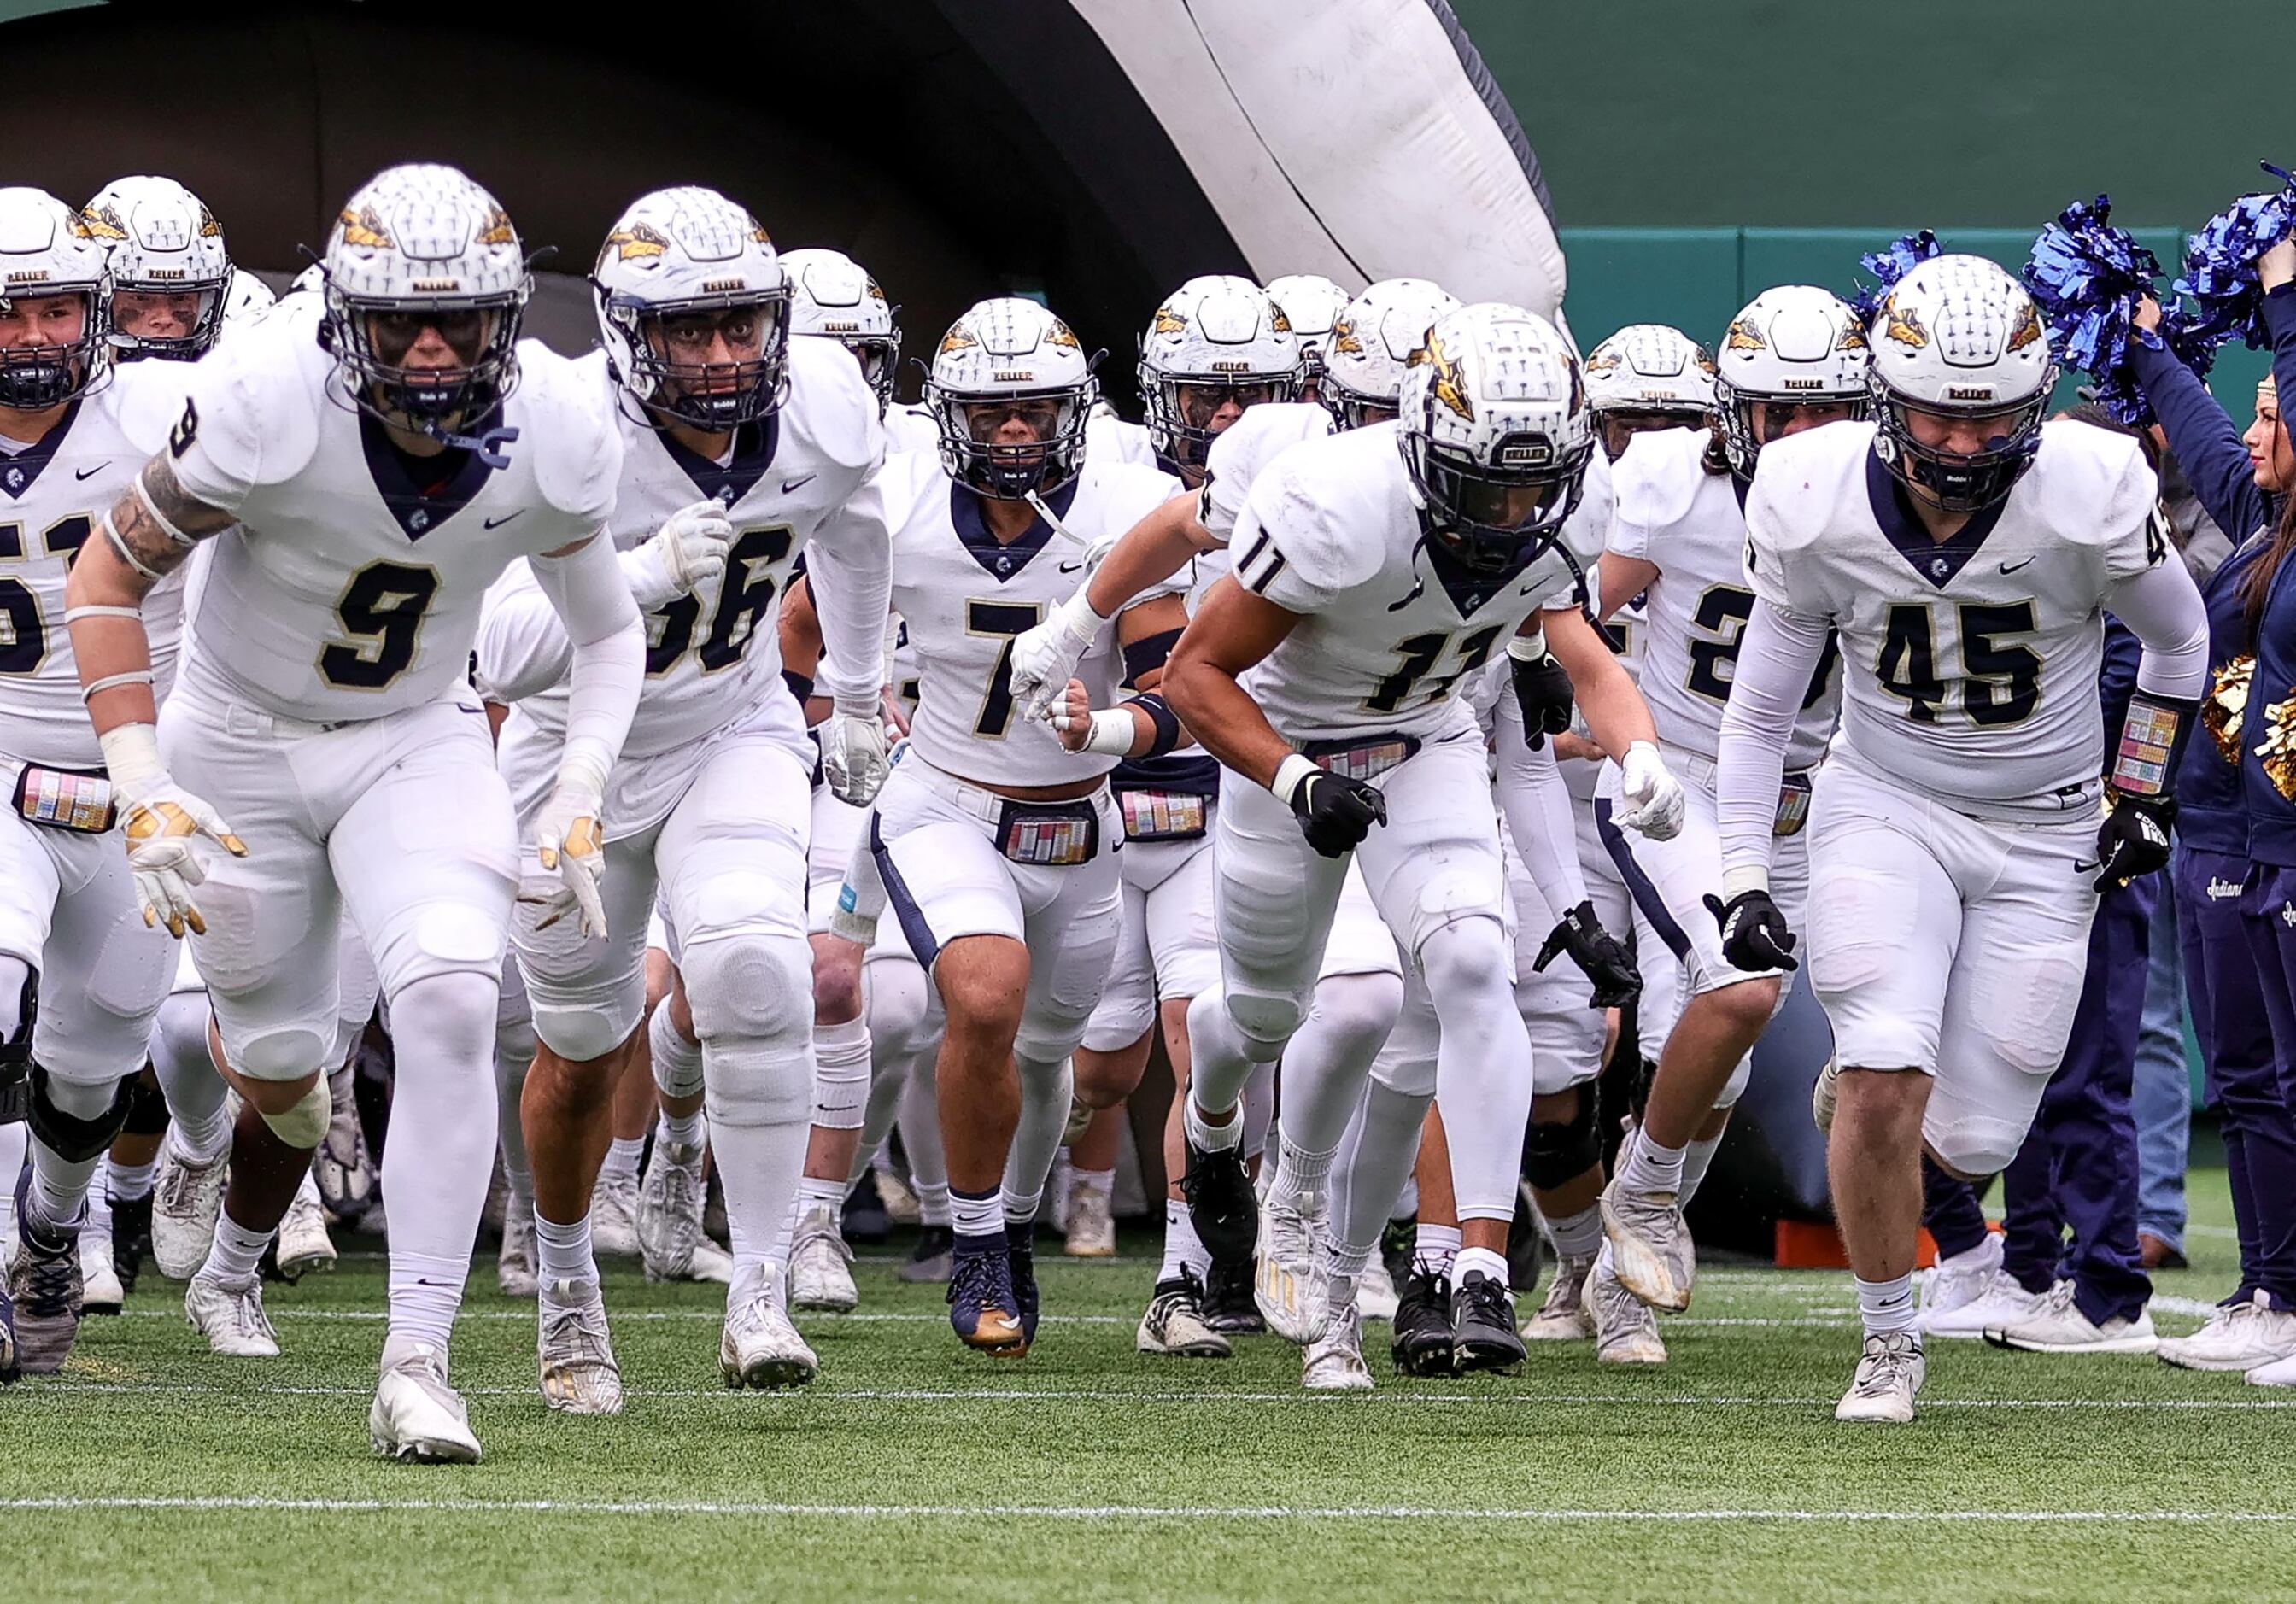 The Keller Indians enter the field to face Lewisville in a Class 6A Division I Region I...